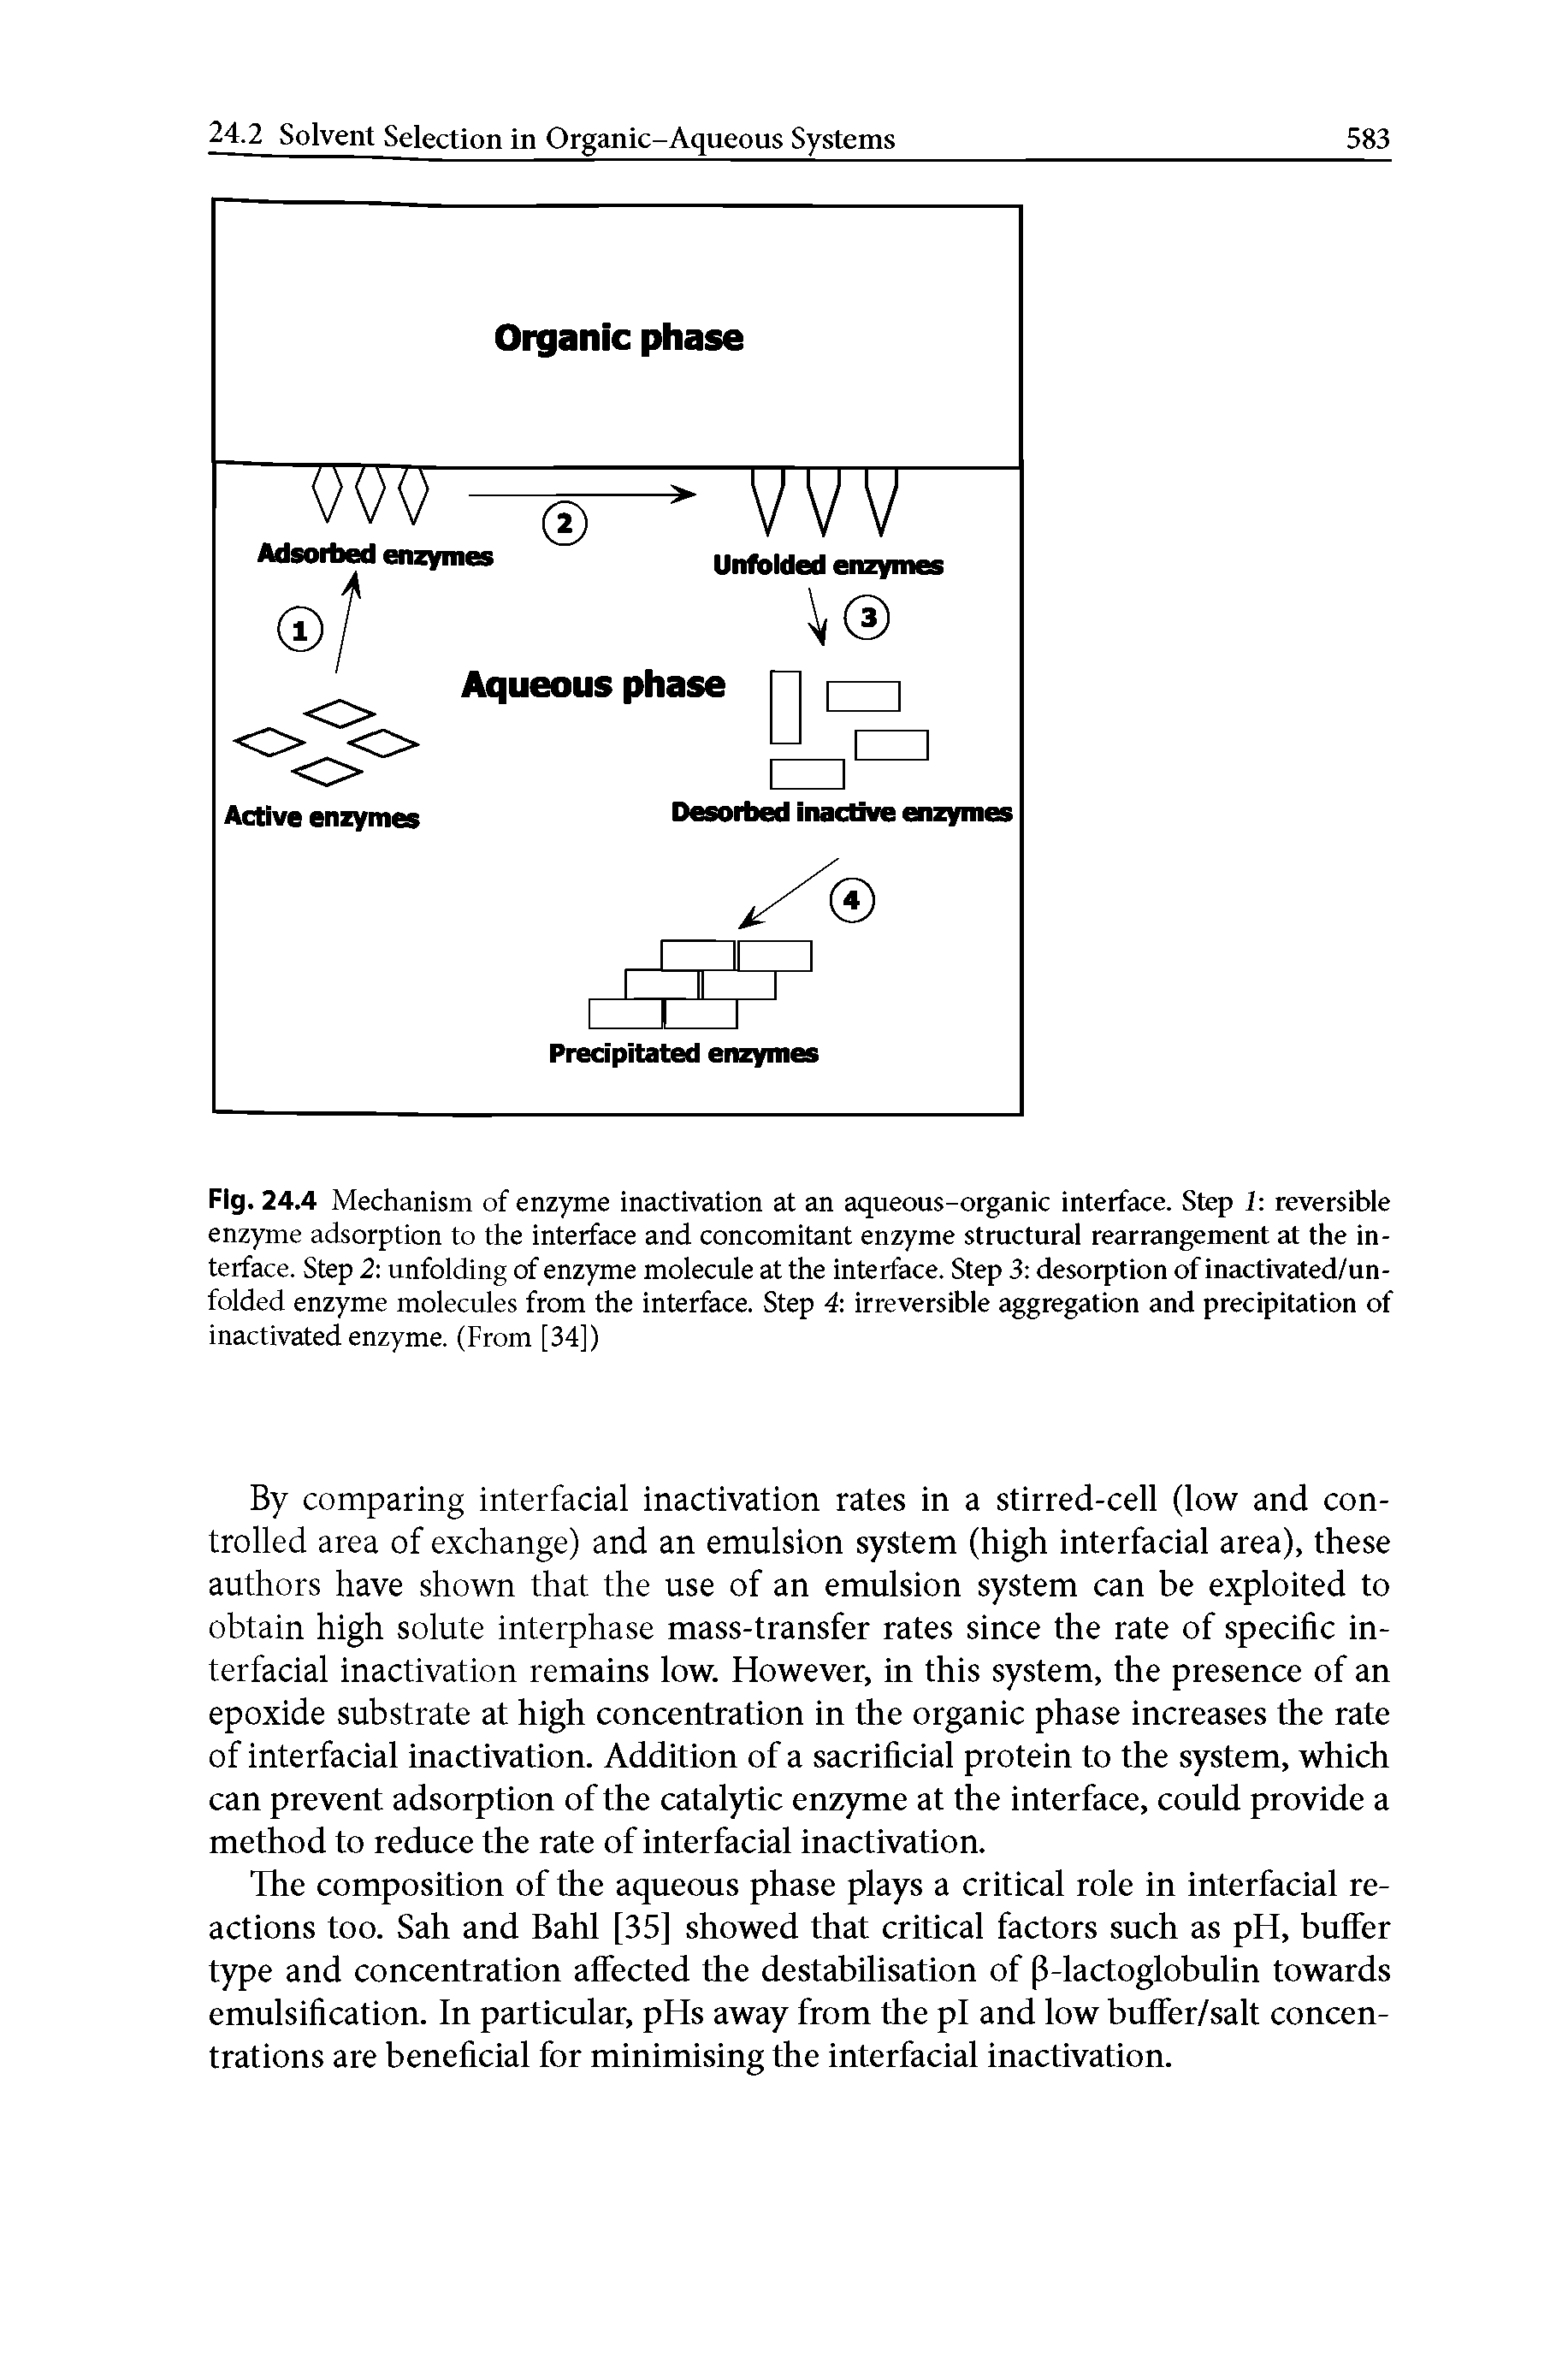 Fig. 24.4 Mechanism of enzyme inactivation at an aqueous-organic interface. Step 1 reversible enzyme adsorption to the interface and concomitant enzyme structural rearrangement at the interface. Step 2 unfolding of enzyme molecule at the interface. Step 3 desorption of inactivated/un-folded enzyme molecules from the interface. Step 4 irreversible aggregation and precipitation of inactivated enzyme. (From [34])...